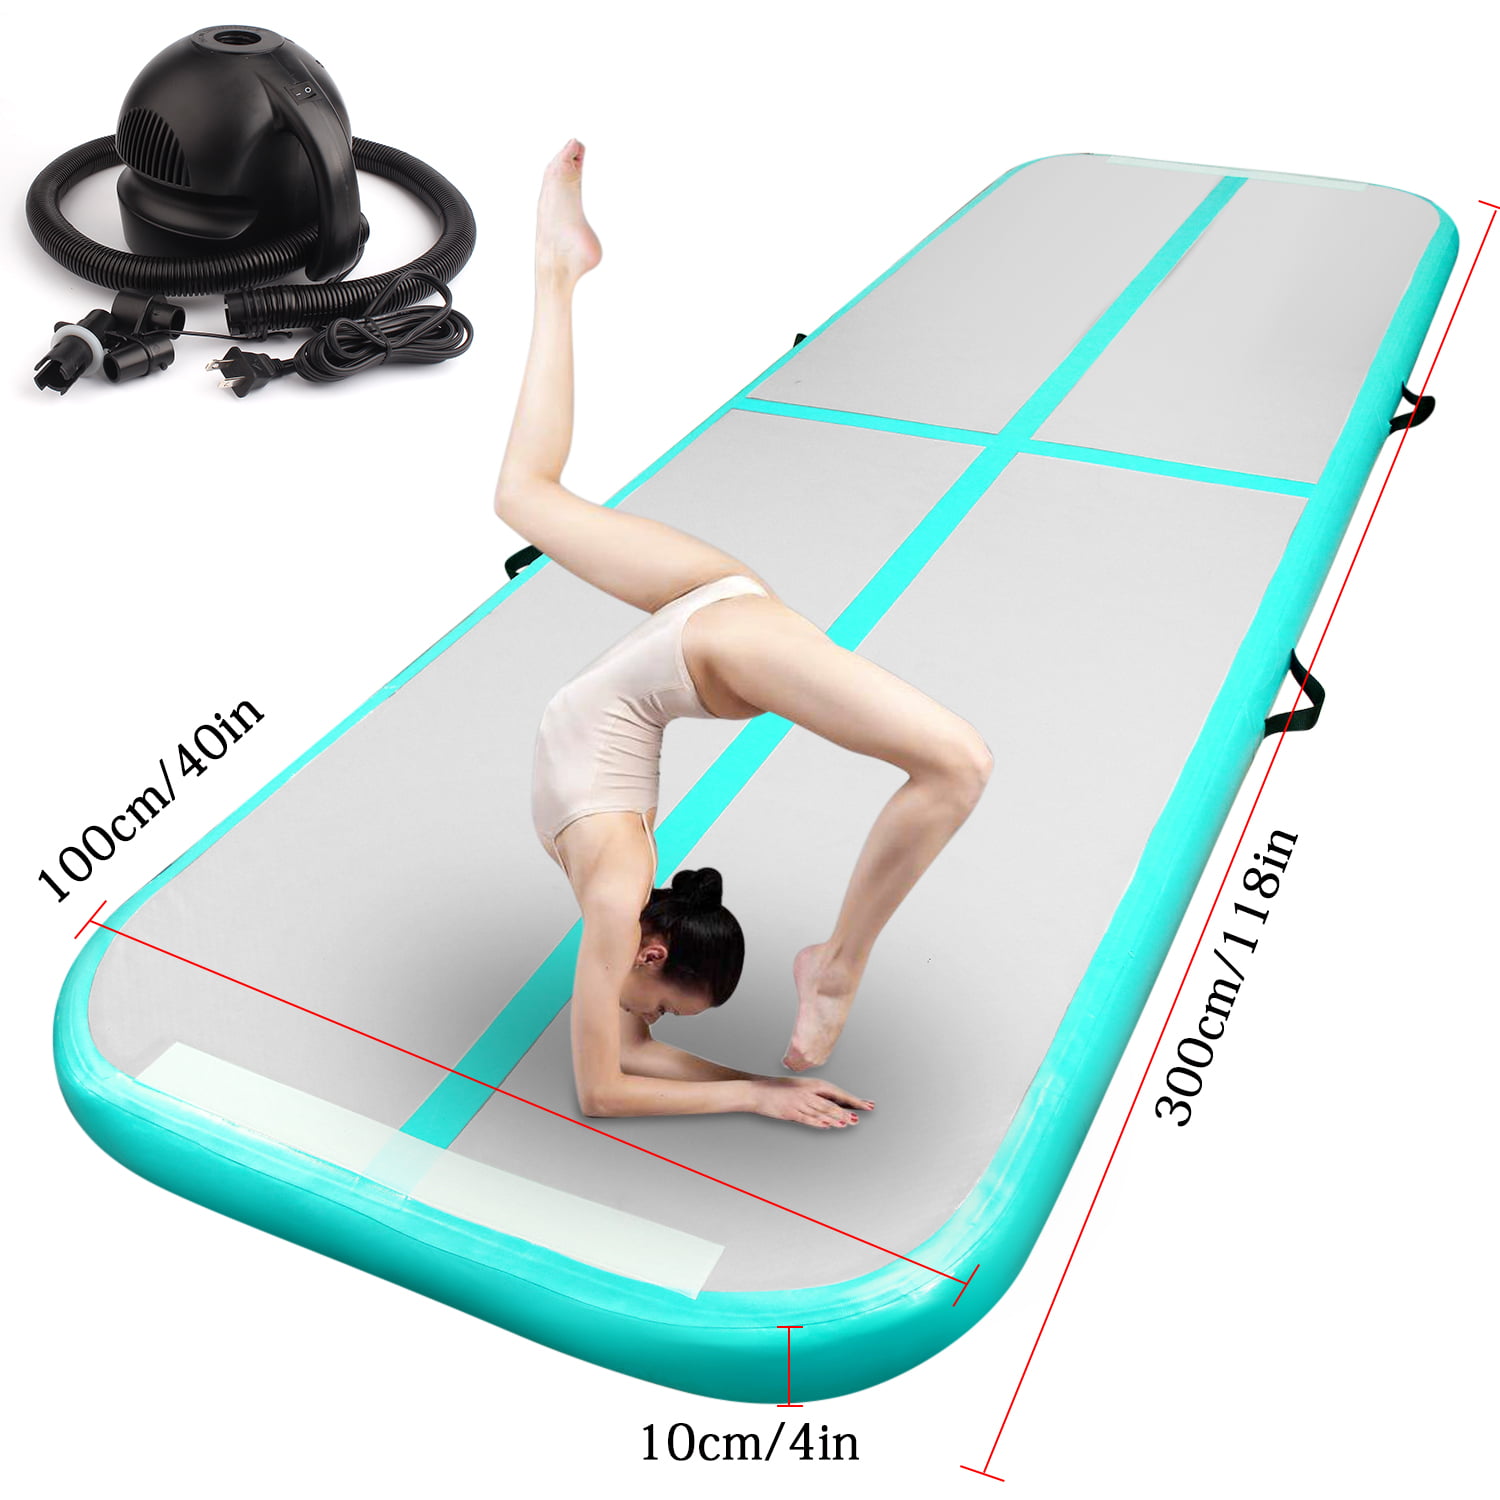 Details about   13FT Air Track Gymnastics Mat Inflatable Airtrack Tumbling Floor Yoga Gym Mats 